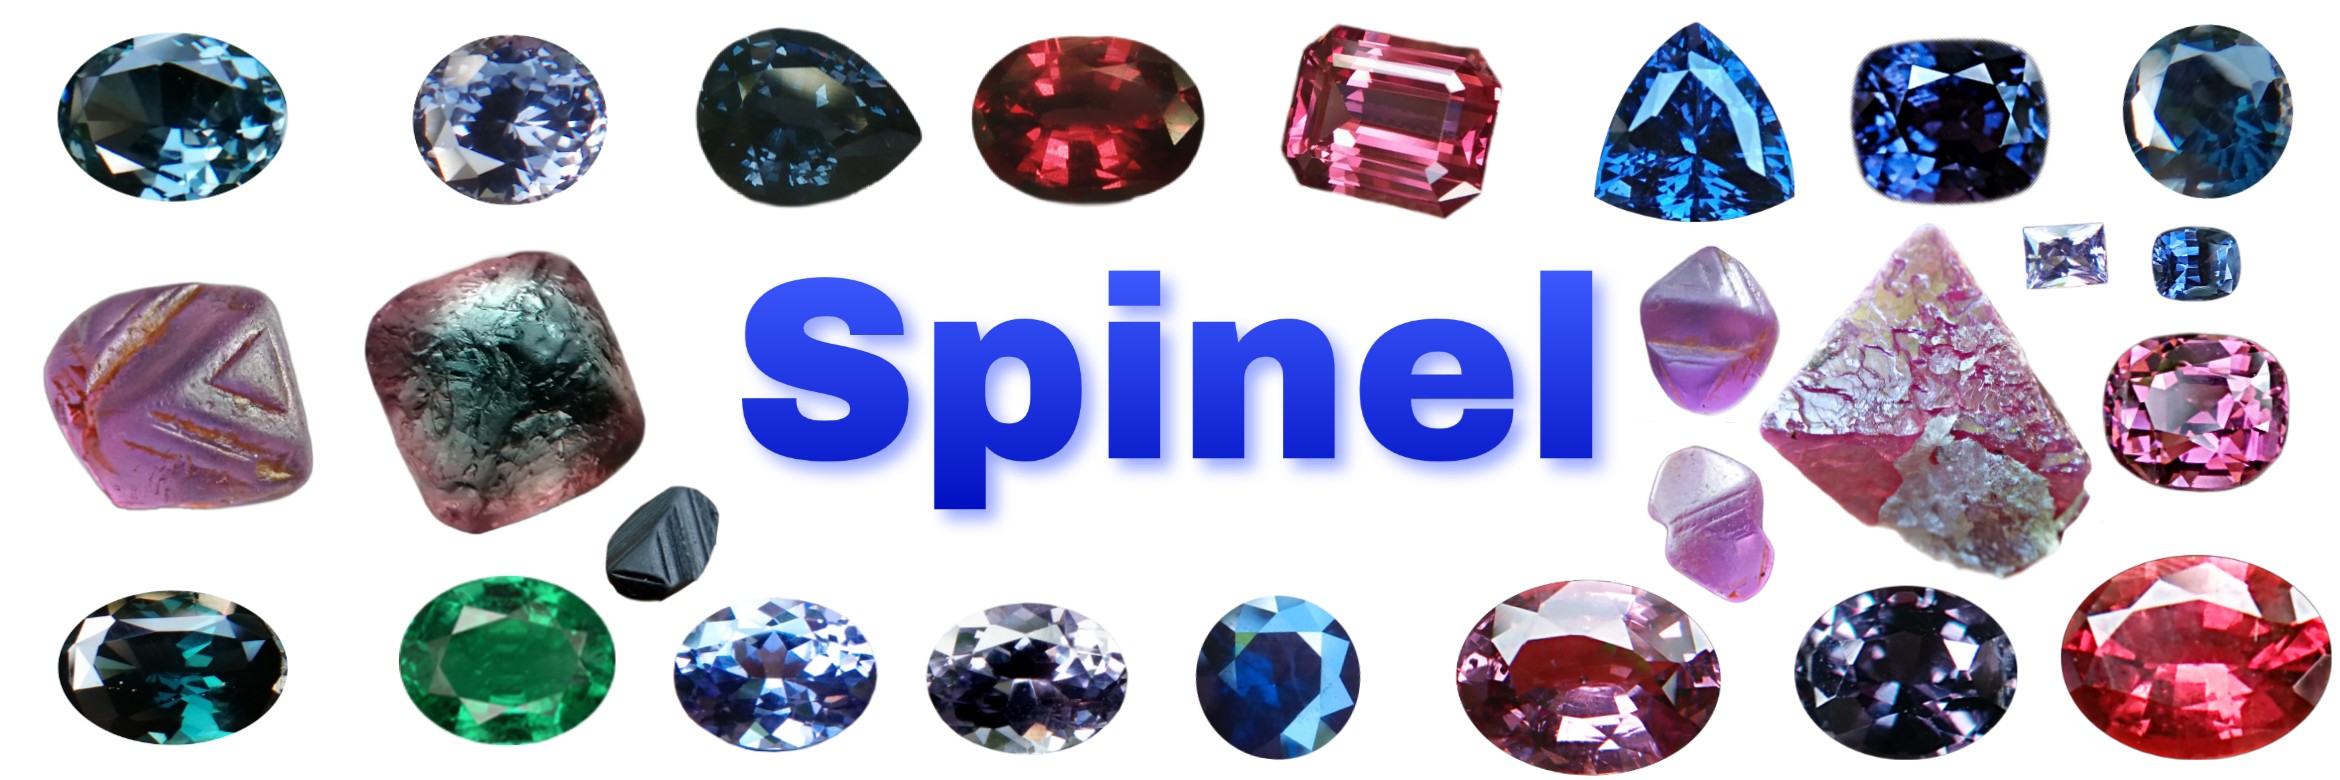 Spinel source value price healing - Danu Group